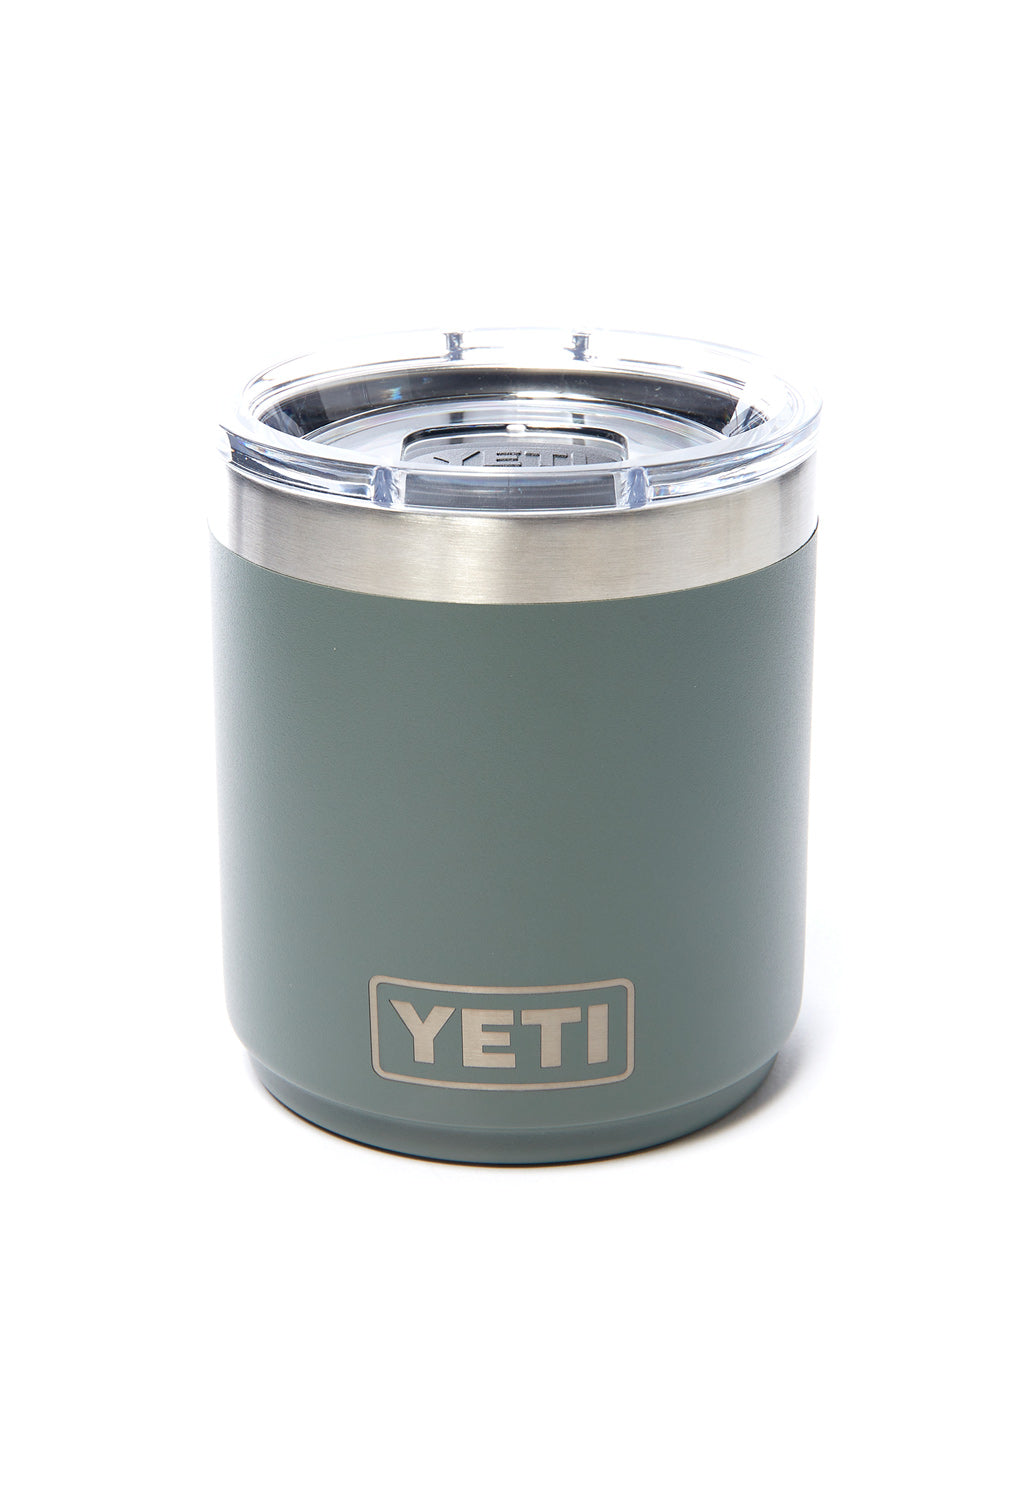 Yeti 10 Ounce Stackable Lowball - Canopy Green